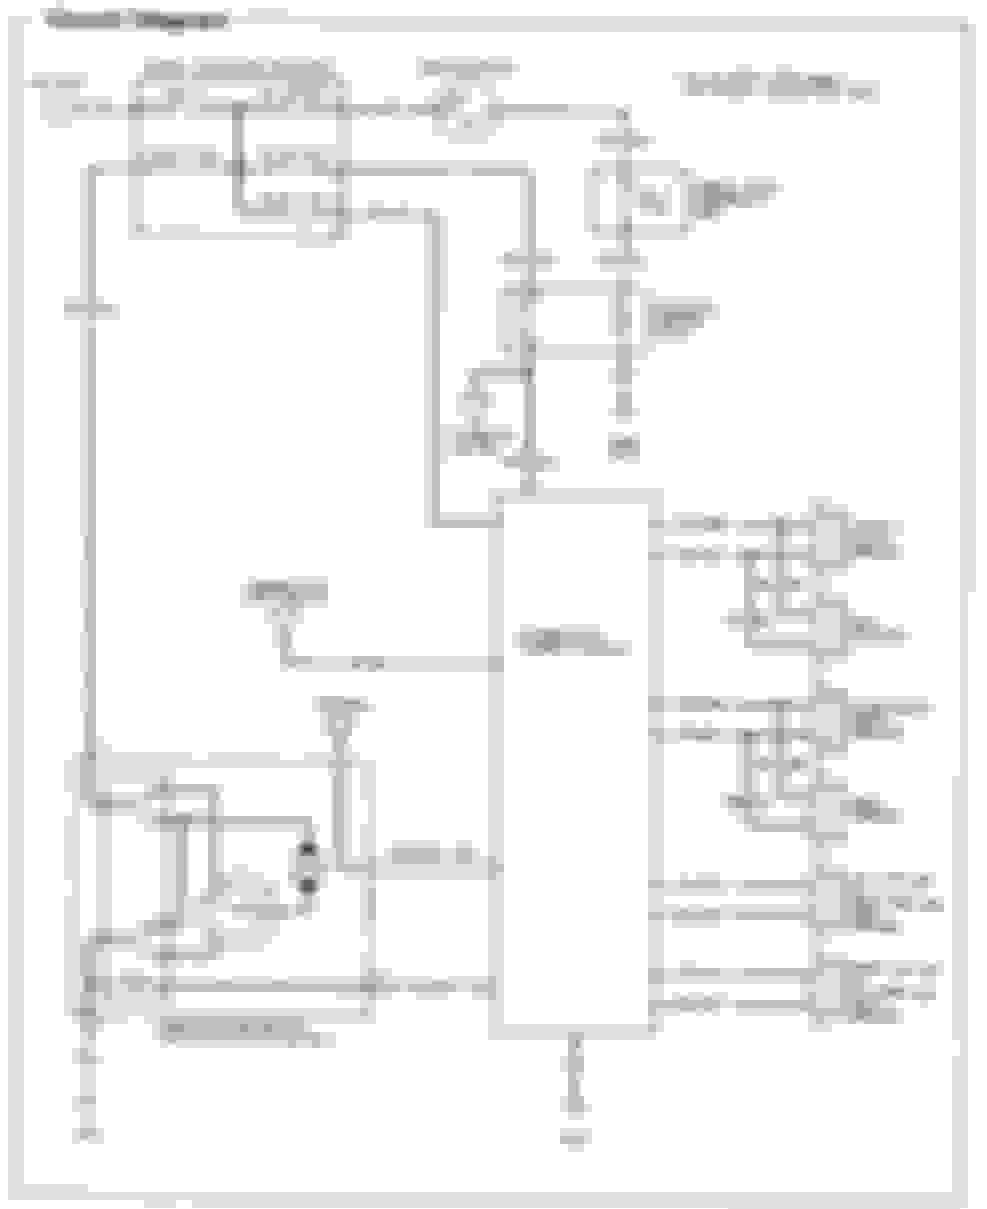 94 accord radio wiring diagram cant find the right one - Honda-Tech